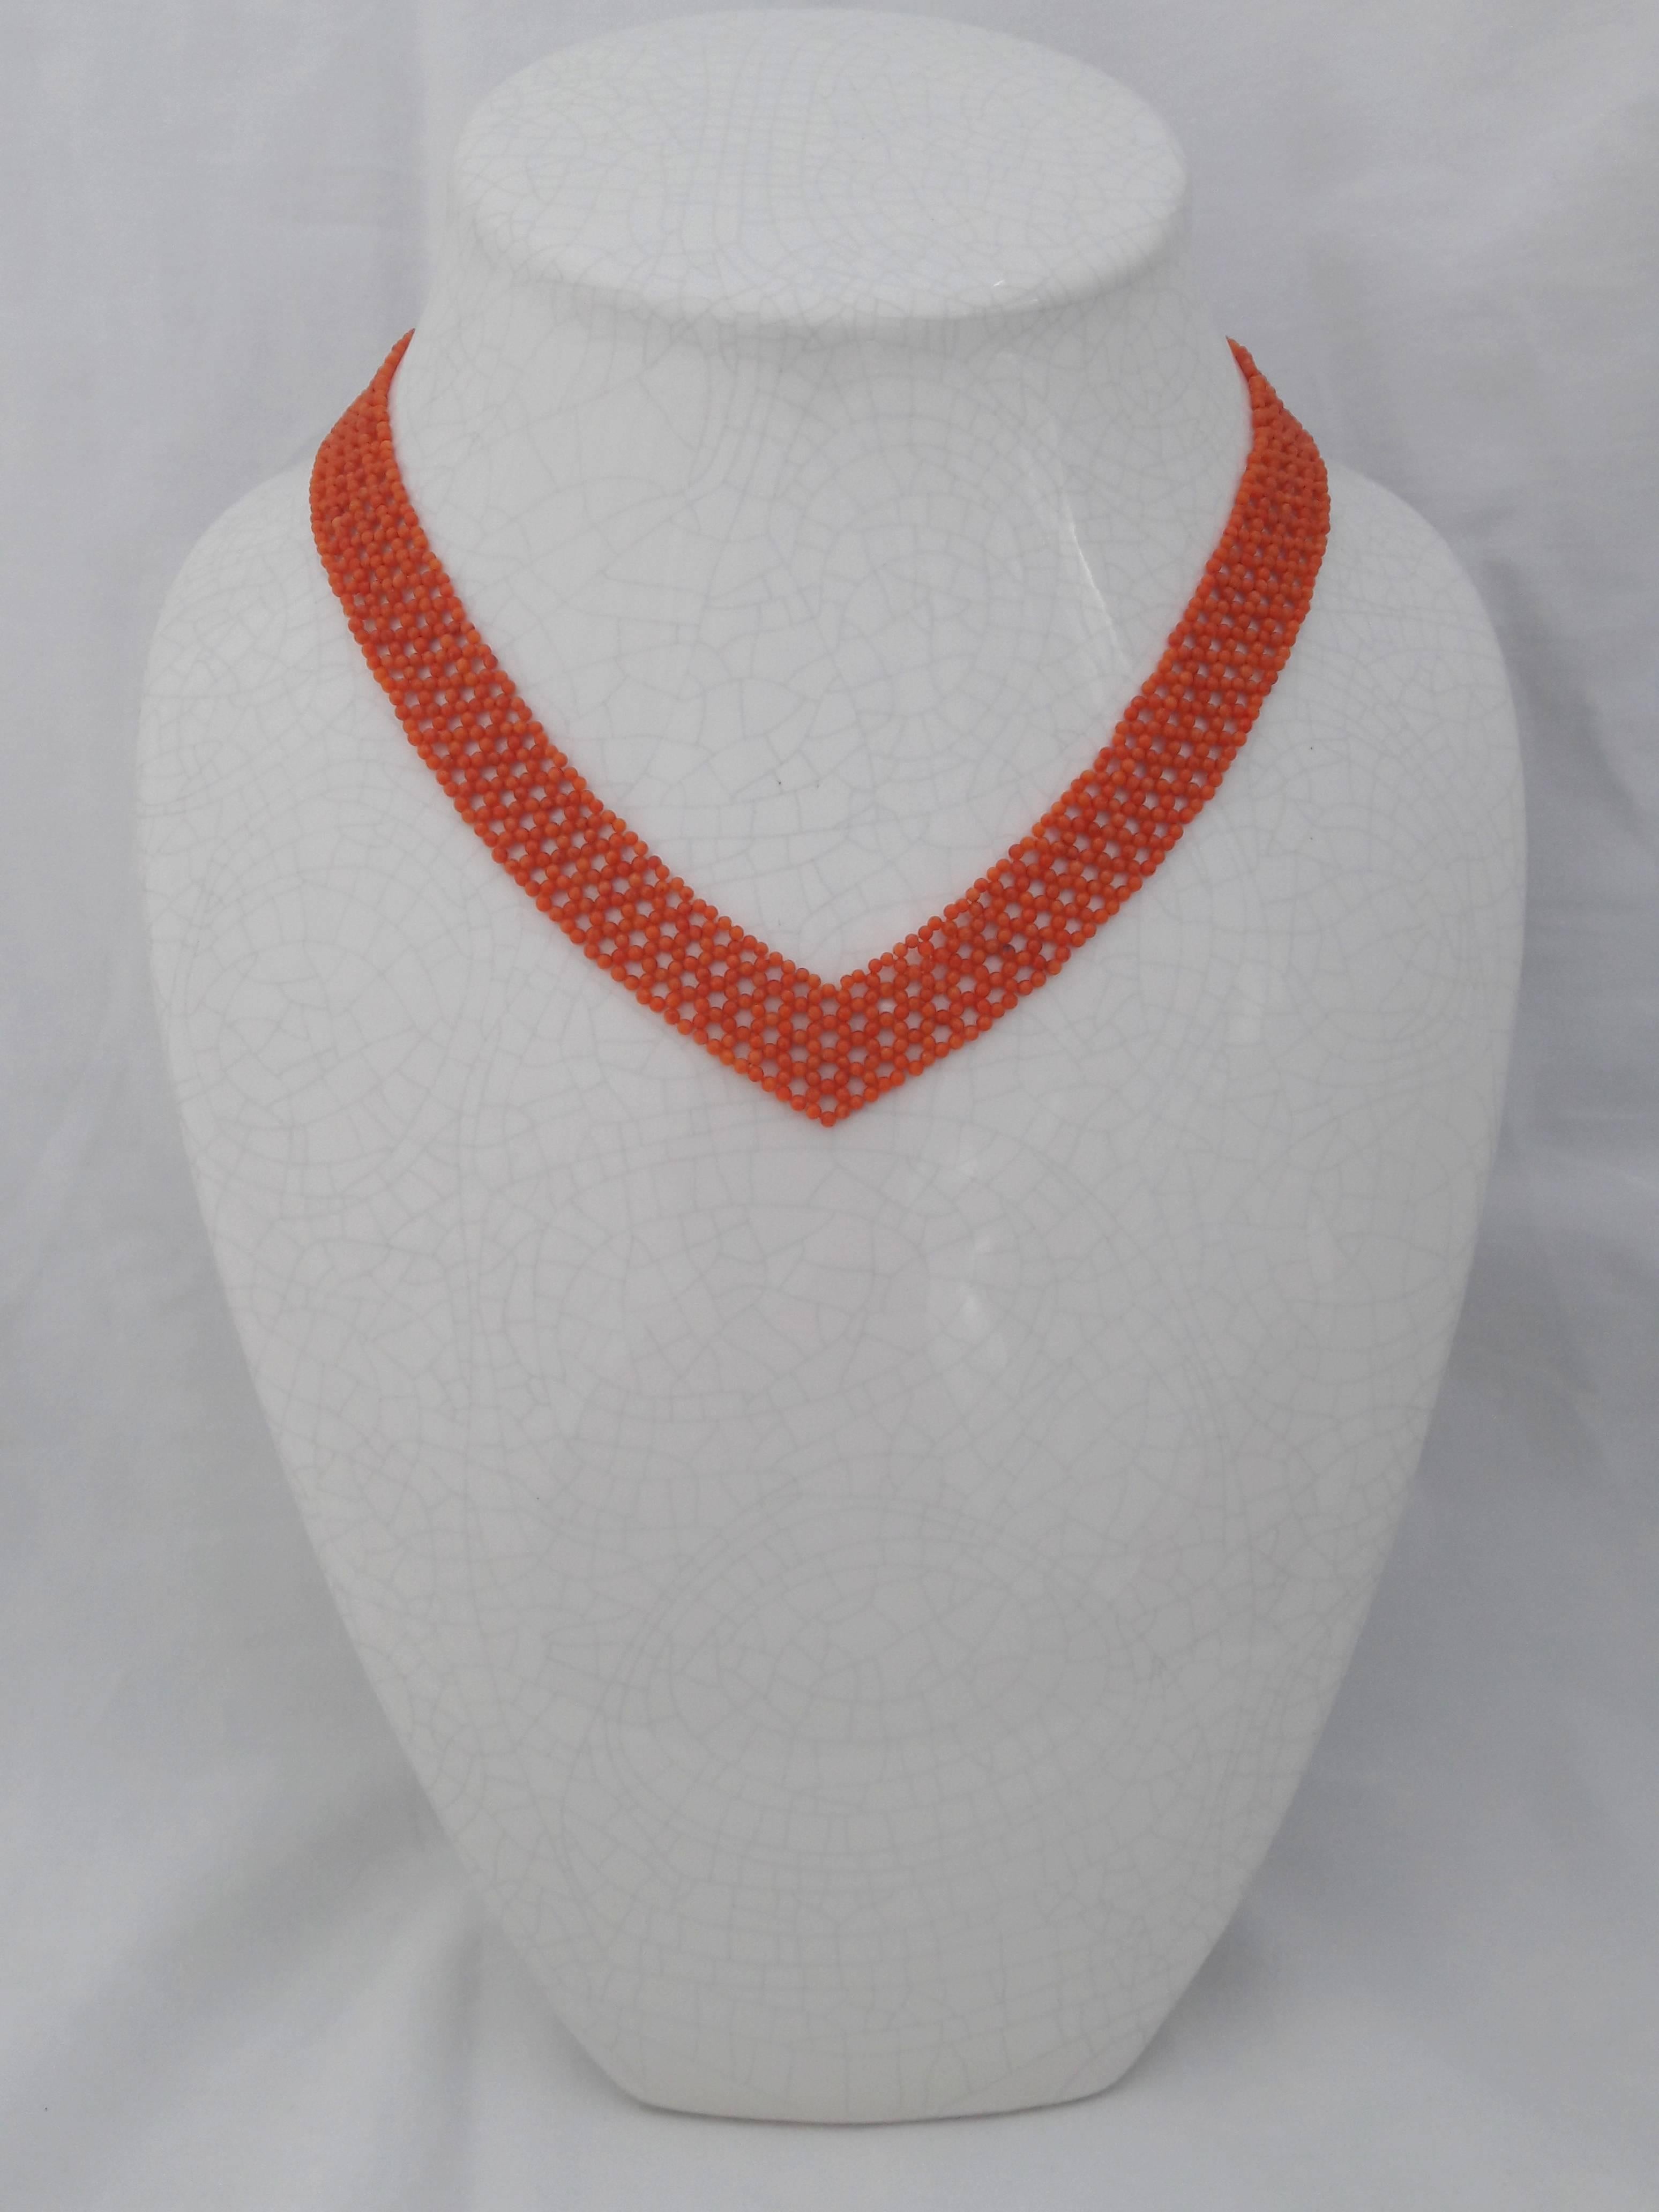 This beautiful V-shaped necklace is designed to lengthen any neckline. Intricately woven coral beads meet at a silver gold plated clasp. This day or evening piece is elegant on its own or can be accented with any brooch by sliding the pint through